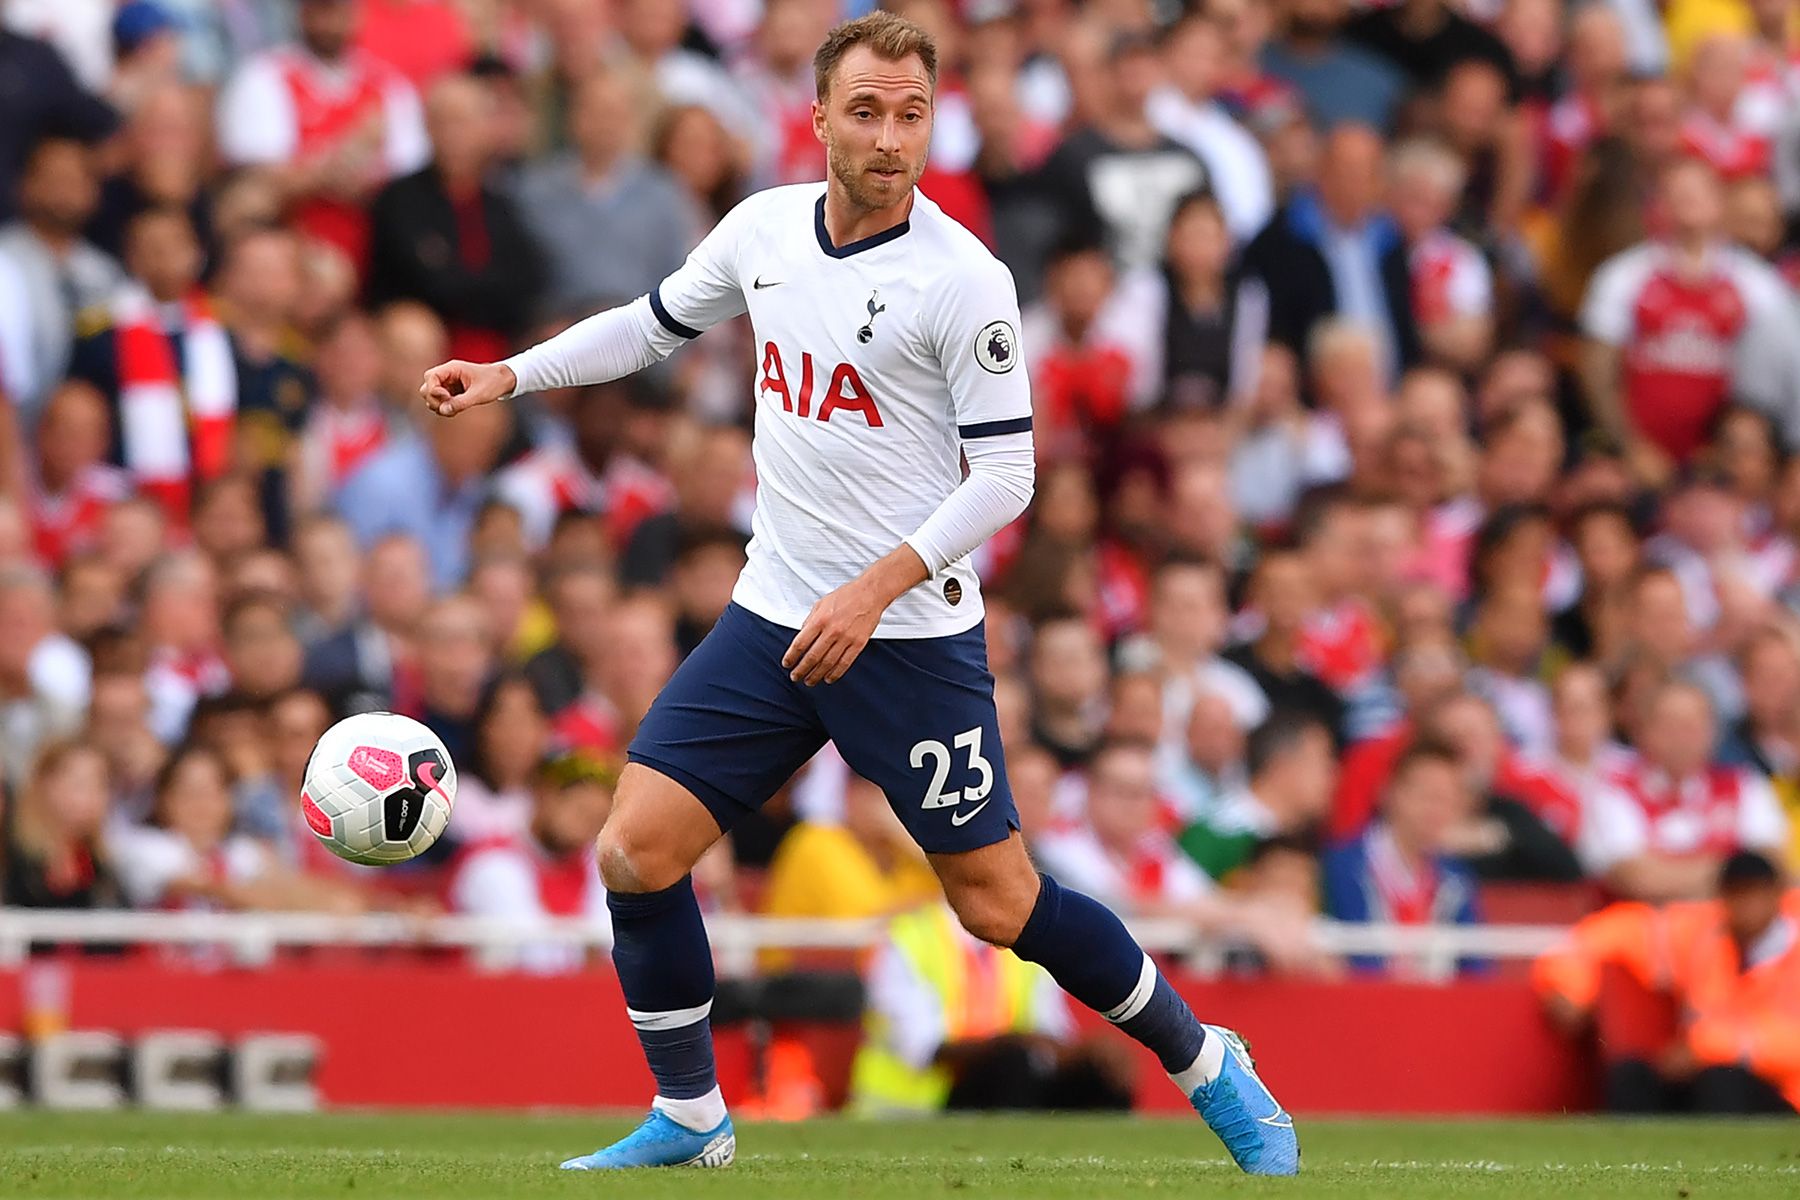 Eriksen In a match with the Tottenham in Premier